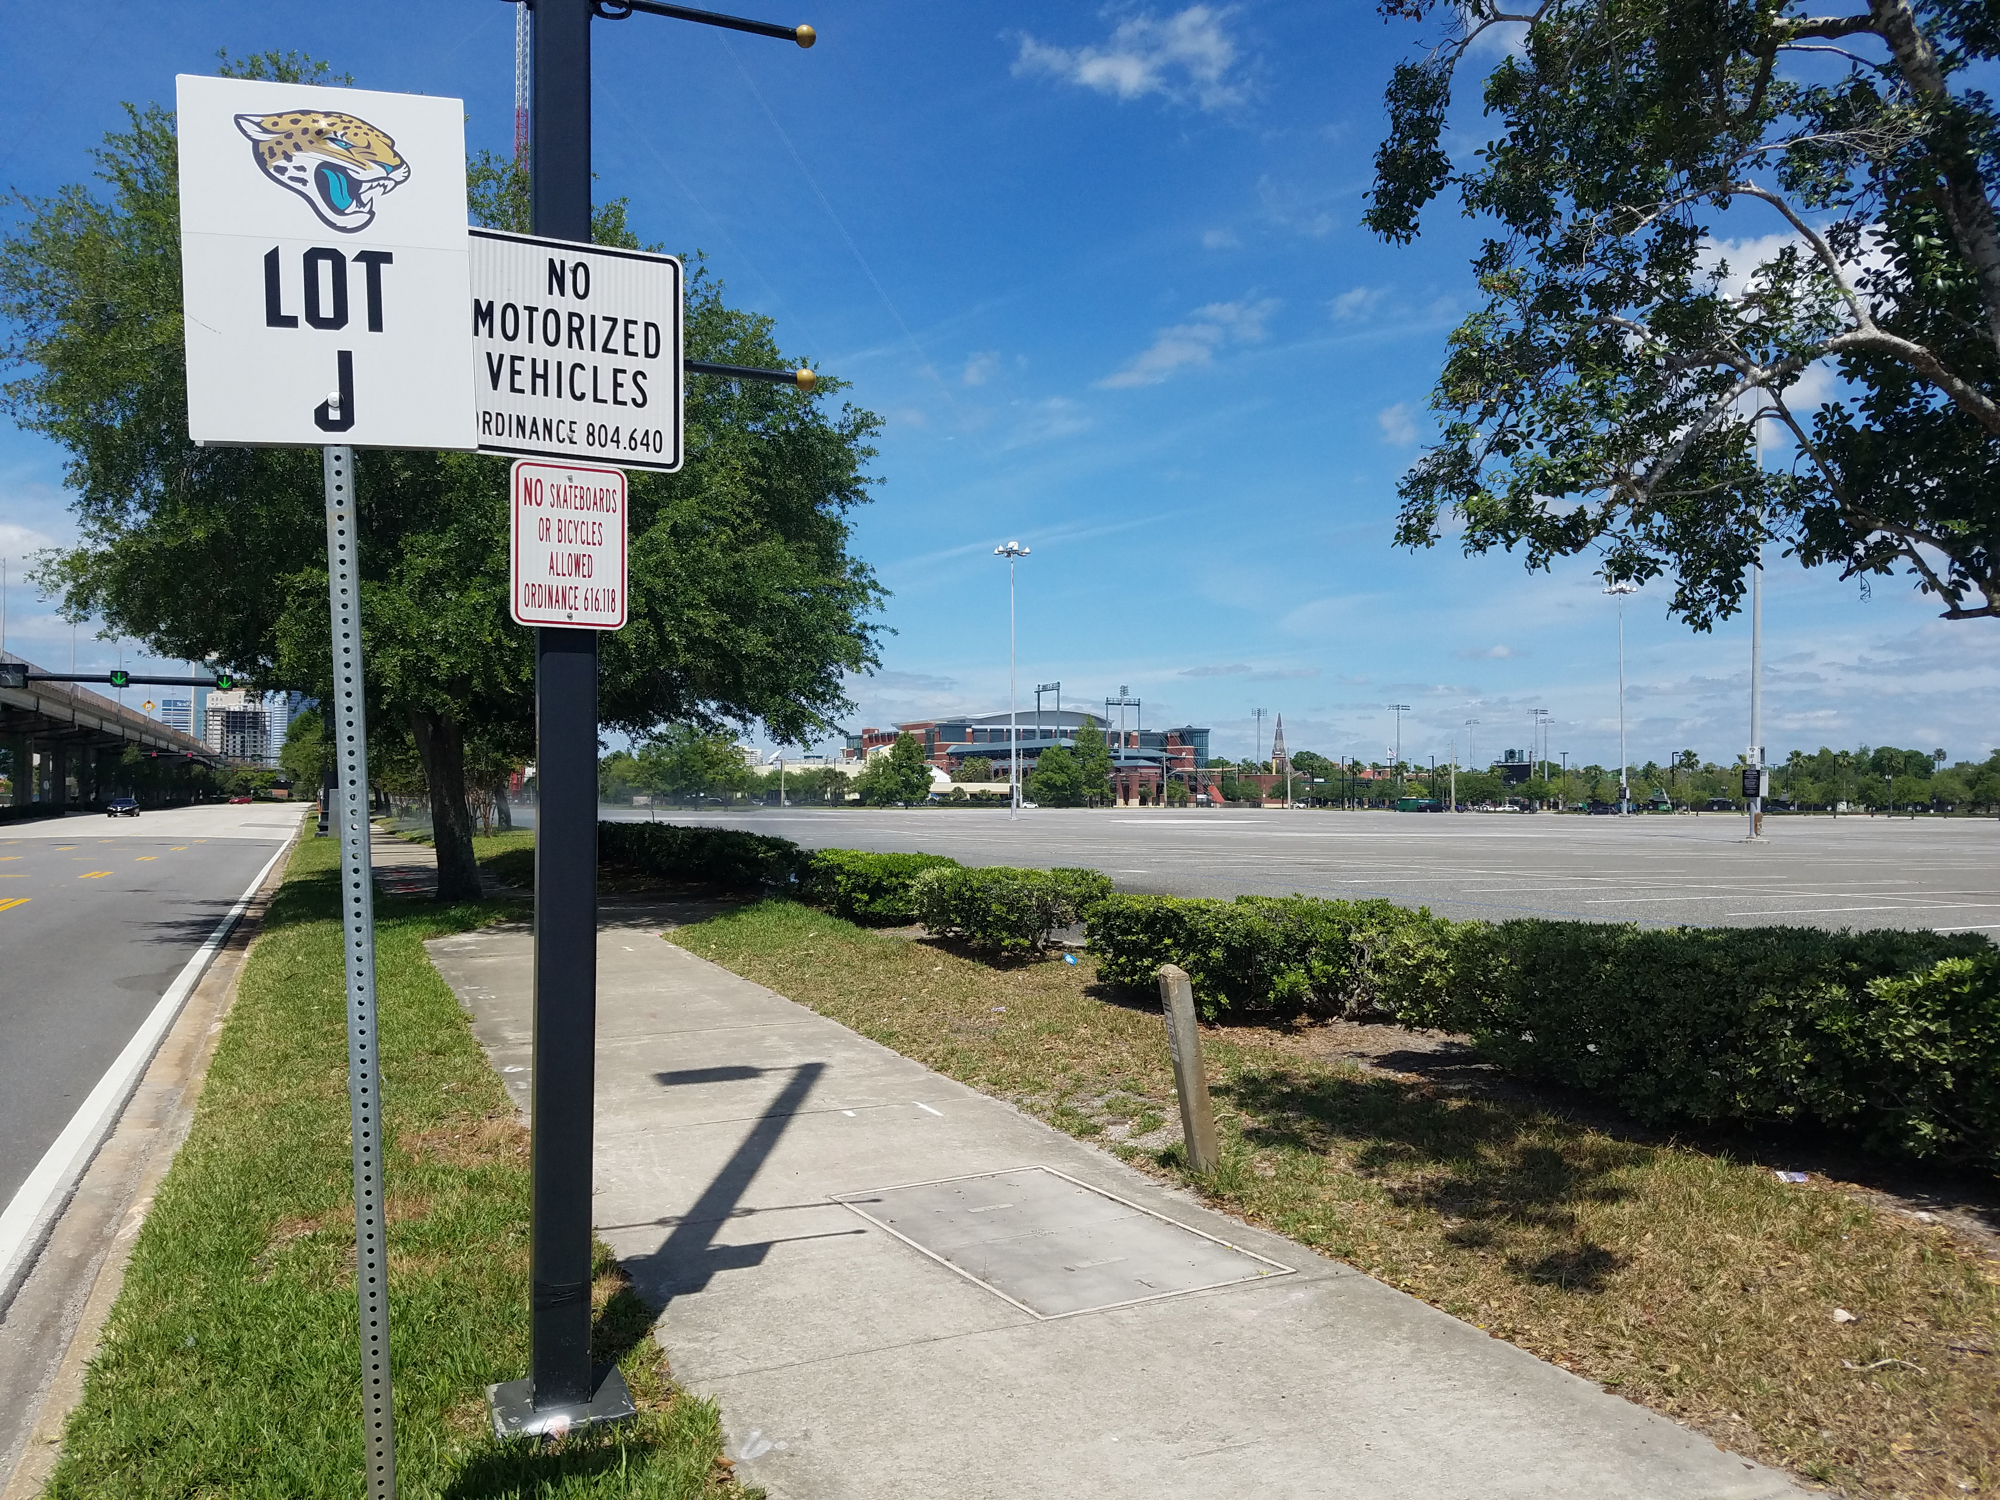 Lot J is west of TIAA Bank Field and along Gator Bowl Boulevard.